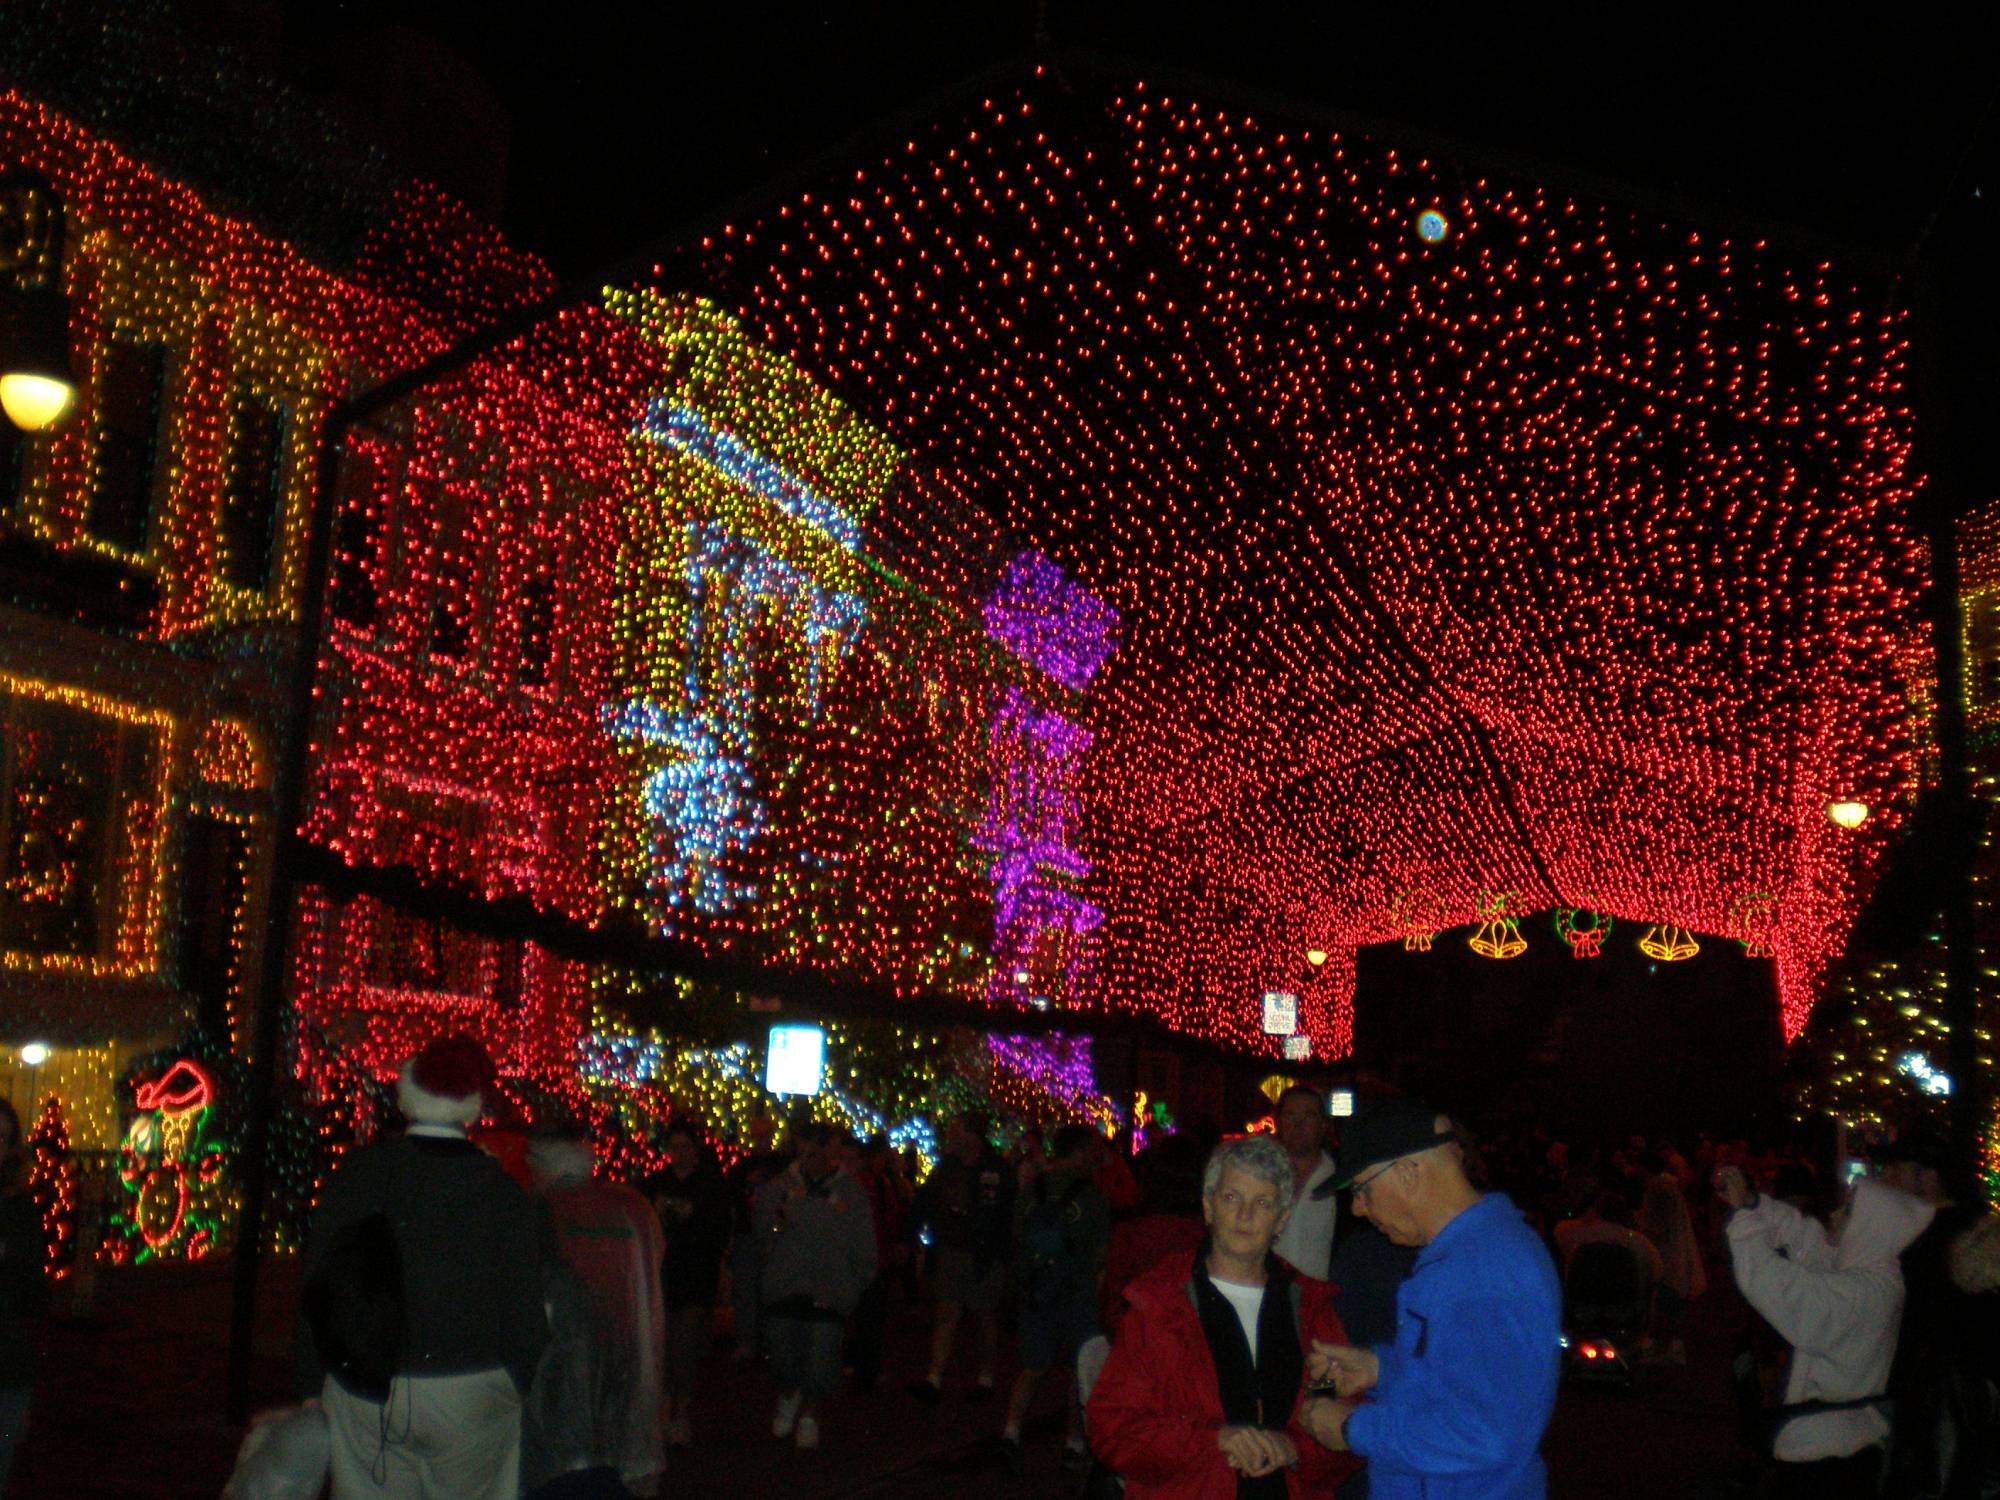 OSBORNE FAMILY SPECTACLE OF DANCING LIGHTS